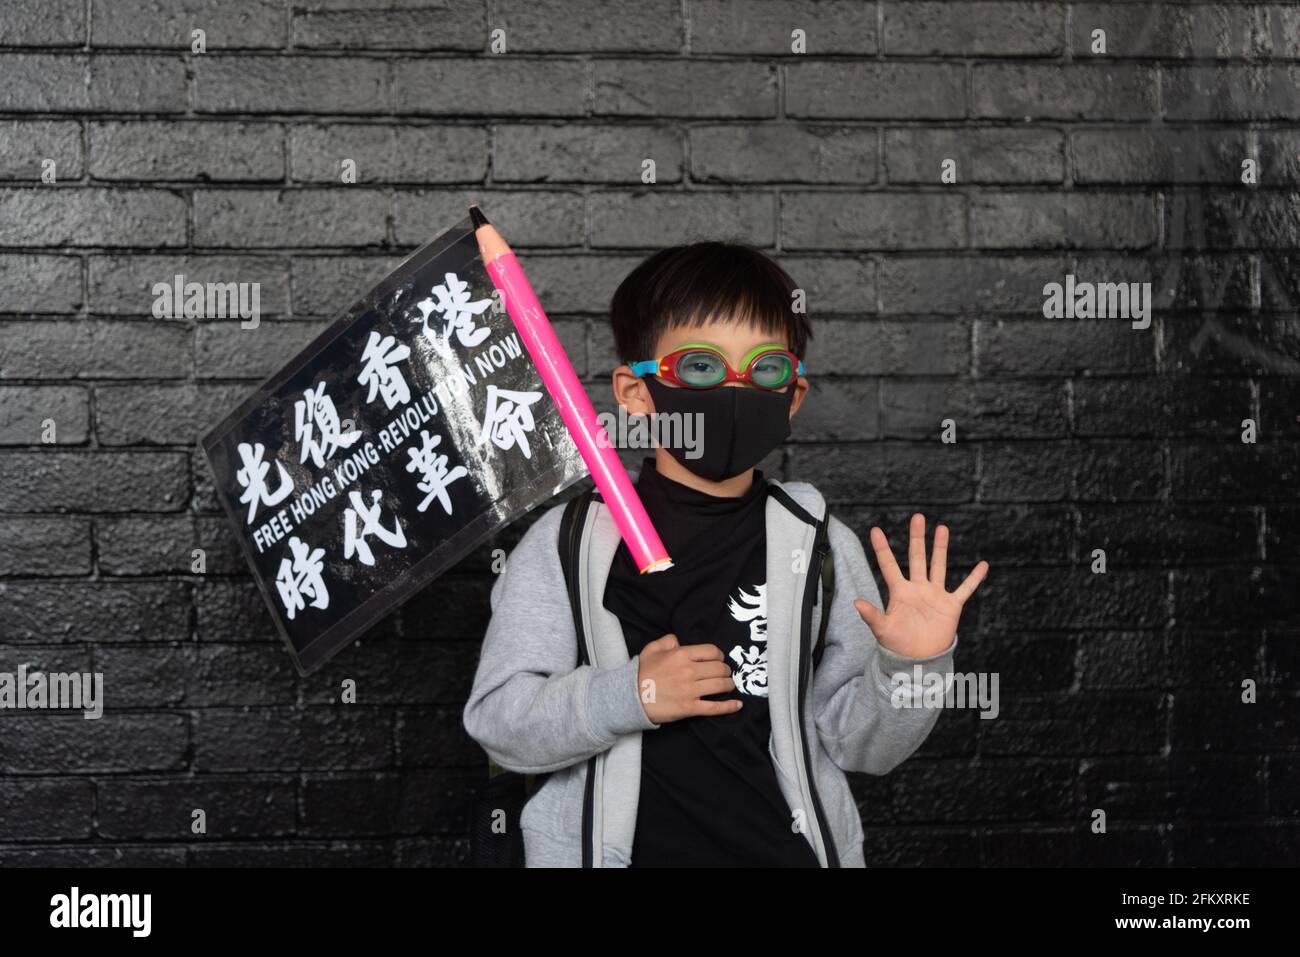 Hong Kong, China, 12 Jan 2020, A child makes the sign 'five demands' after his father dressed him up like a protester, during a pro-democracy rally. Stock Photo